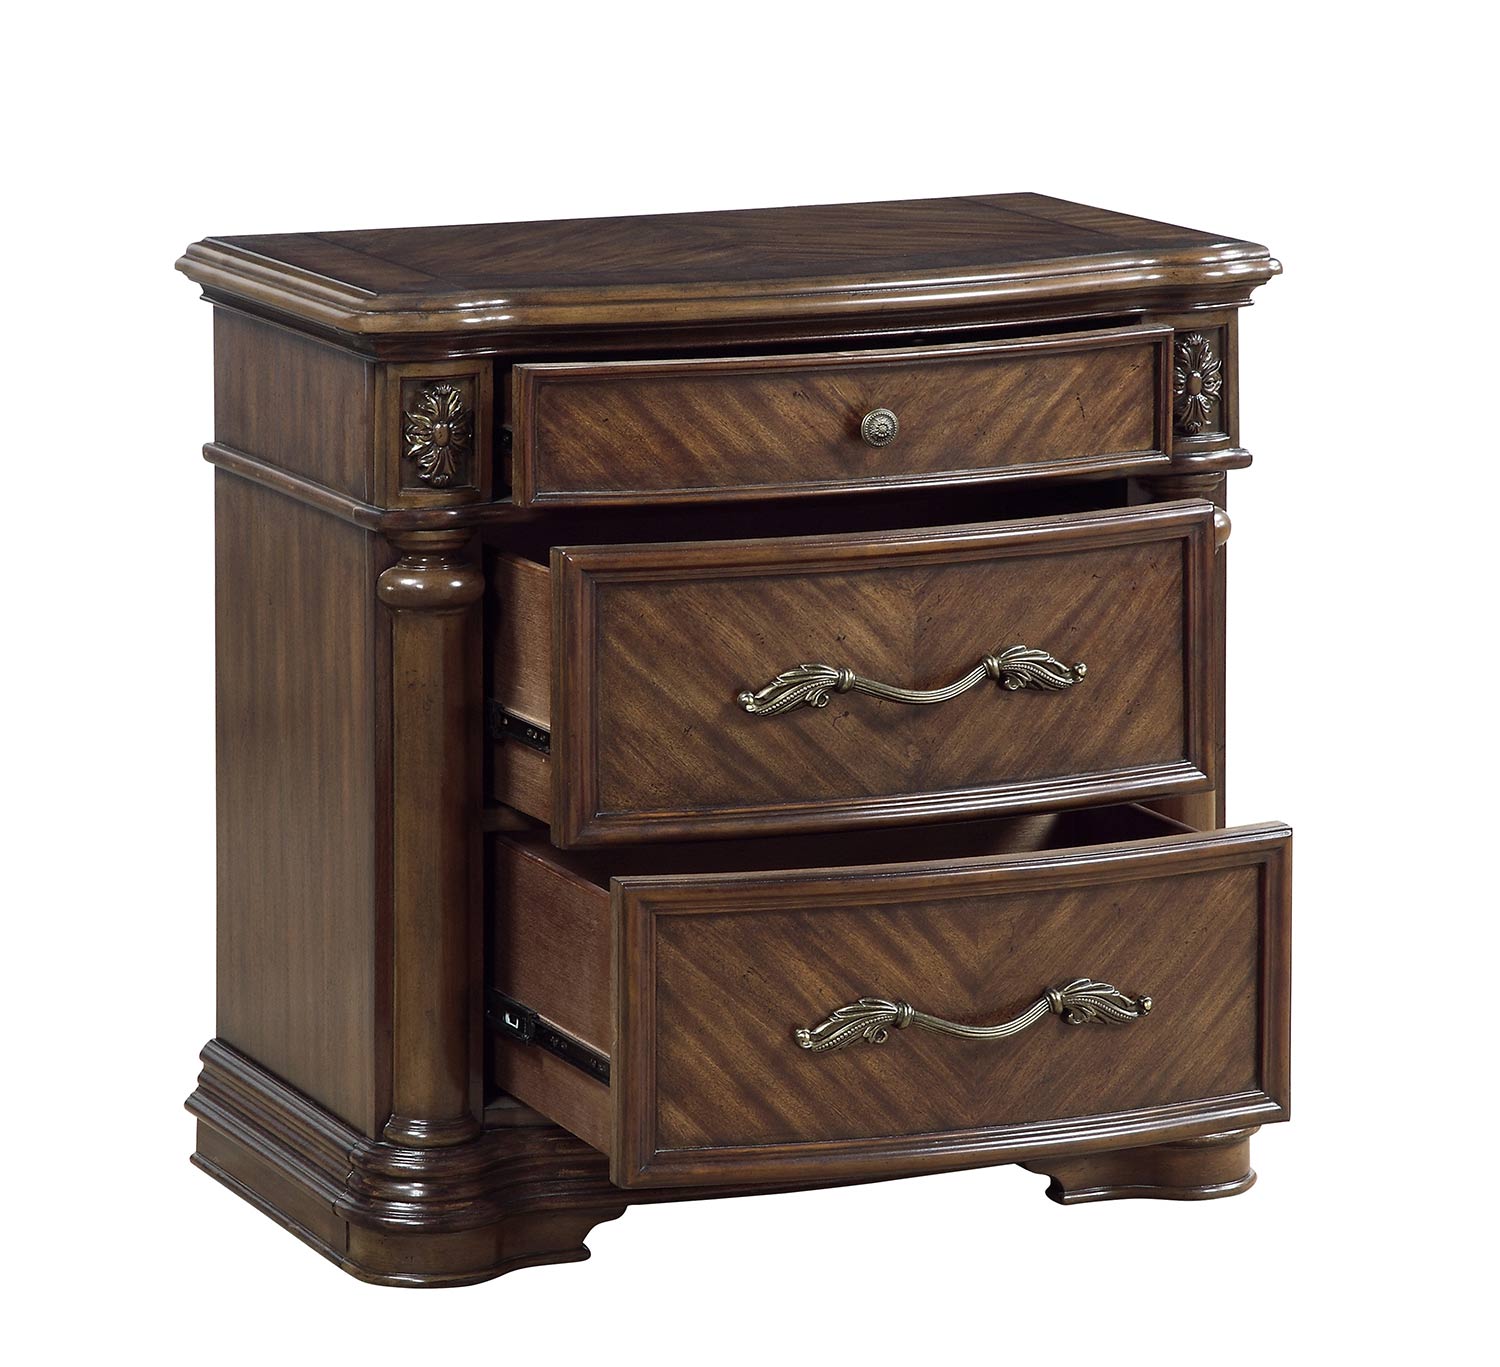 Homelegance Barbary Night Stand - Traditional Cherry